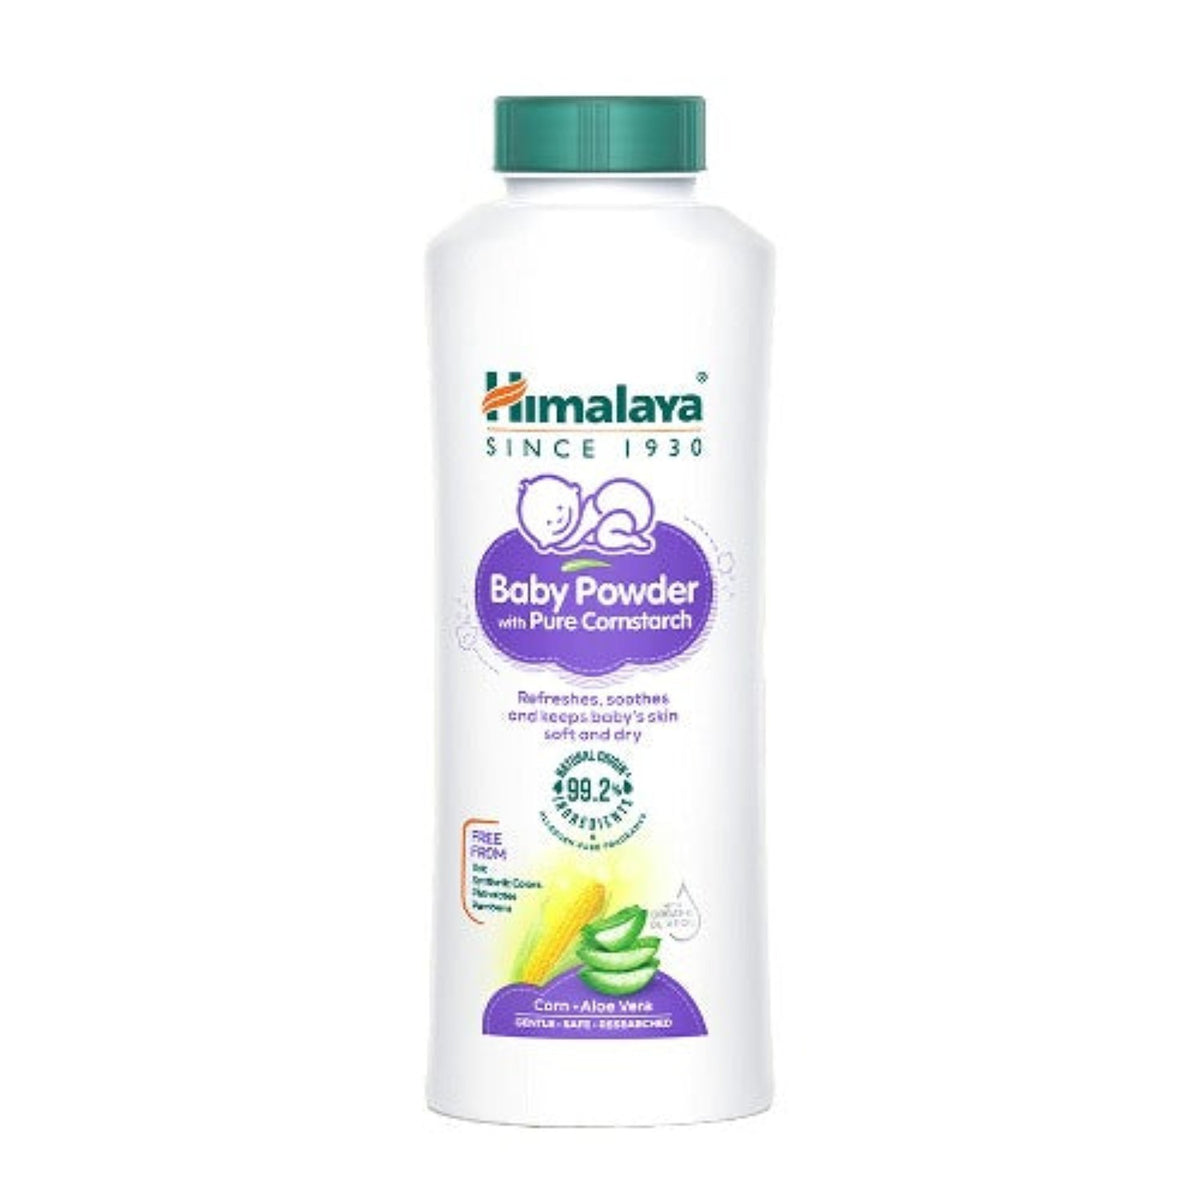 Himalaya Herbal Ayurvedic Baby Care Powder With Pure Cornstarch Refreshes,Soothes,And Keeps Baby’s Skin Soft And Dry Powder